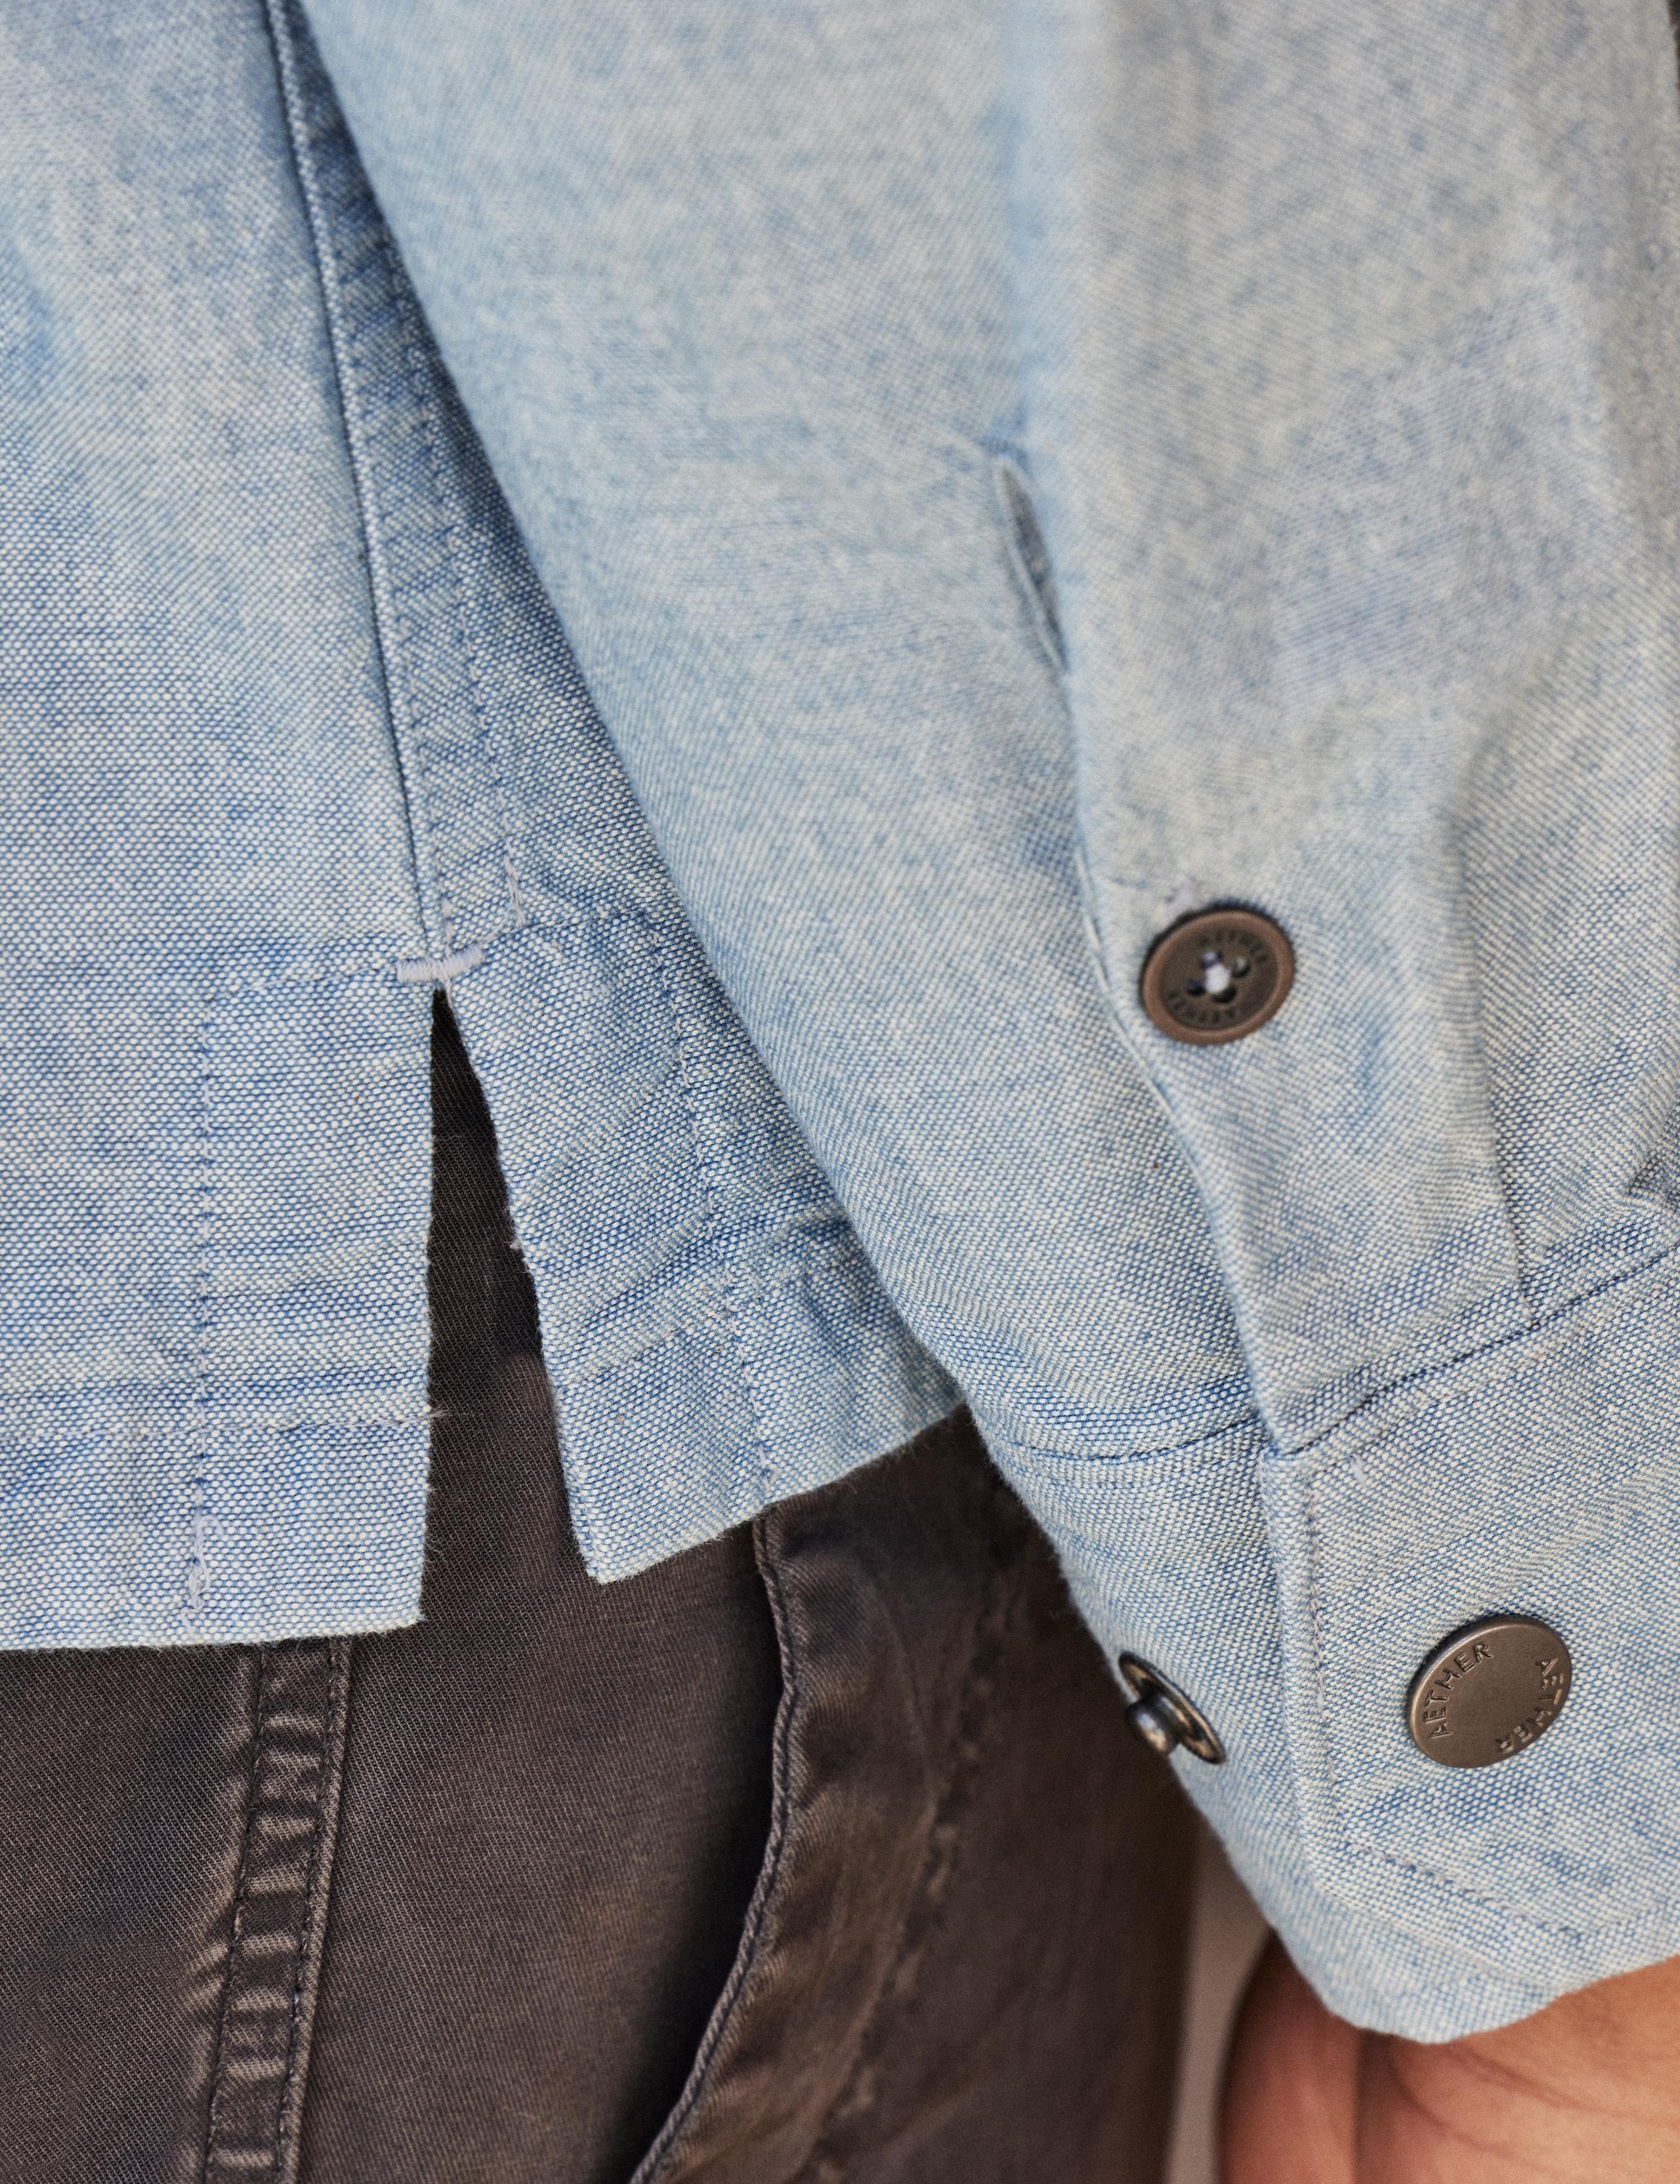 Detail of button sleeve of man wearing Chambray Button-Down